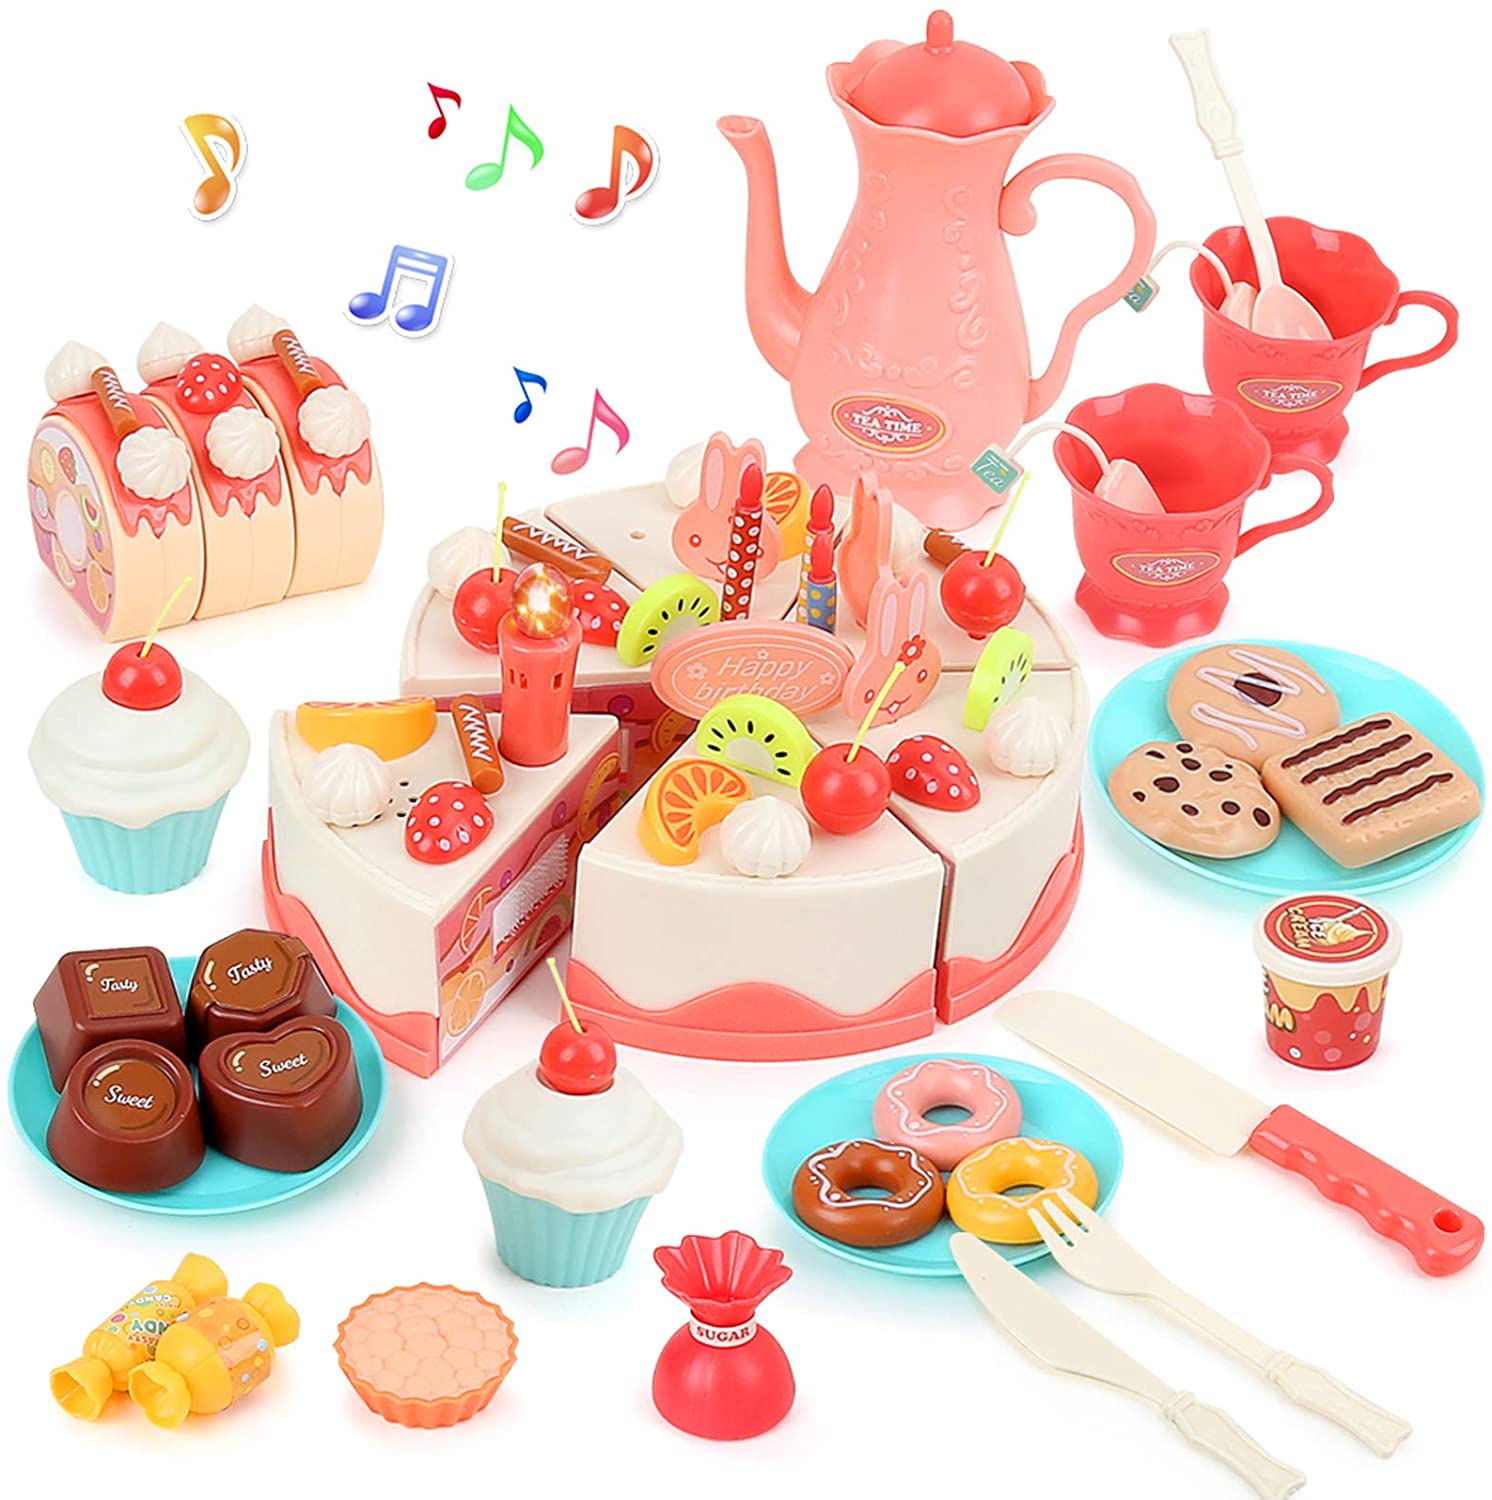 factory Outlets for Control Car Toy - Beebeerun Pretend Play Food for Kids,DIY 82PCS Cutting Birthday Cake Toy with Candles Fruit Dessert Plates Teacup and More,Educational Toy Kitchen Sets for Gi...